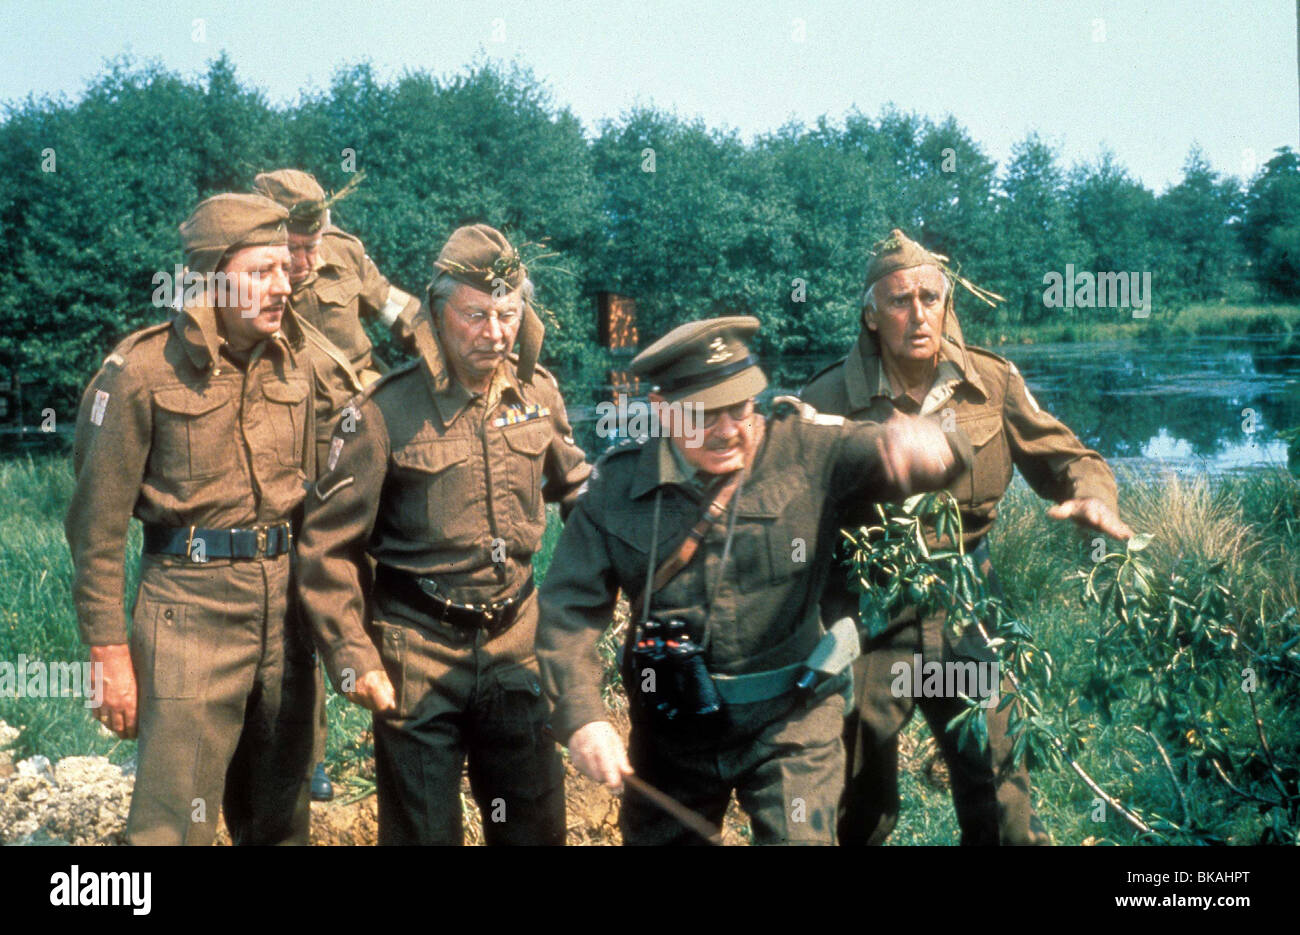 DAD'S ARMY (TV) JAMES BECK, ARNOLD RIDLEY, CLIVE DUNN, ARTHUR LOWE, JOHN LAURIE DADA 004 Stock Photo